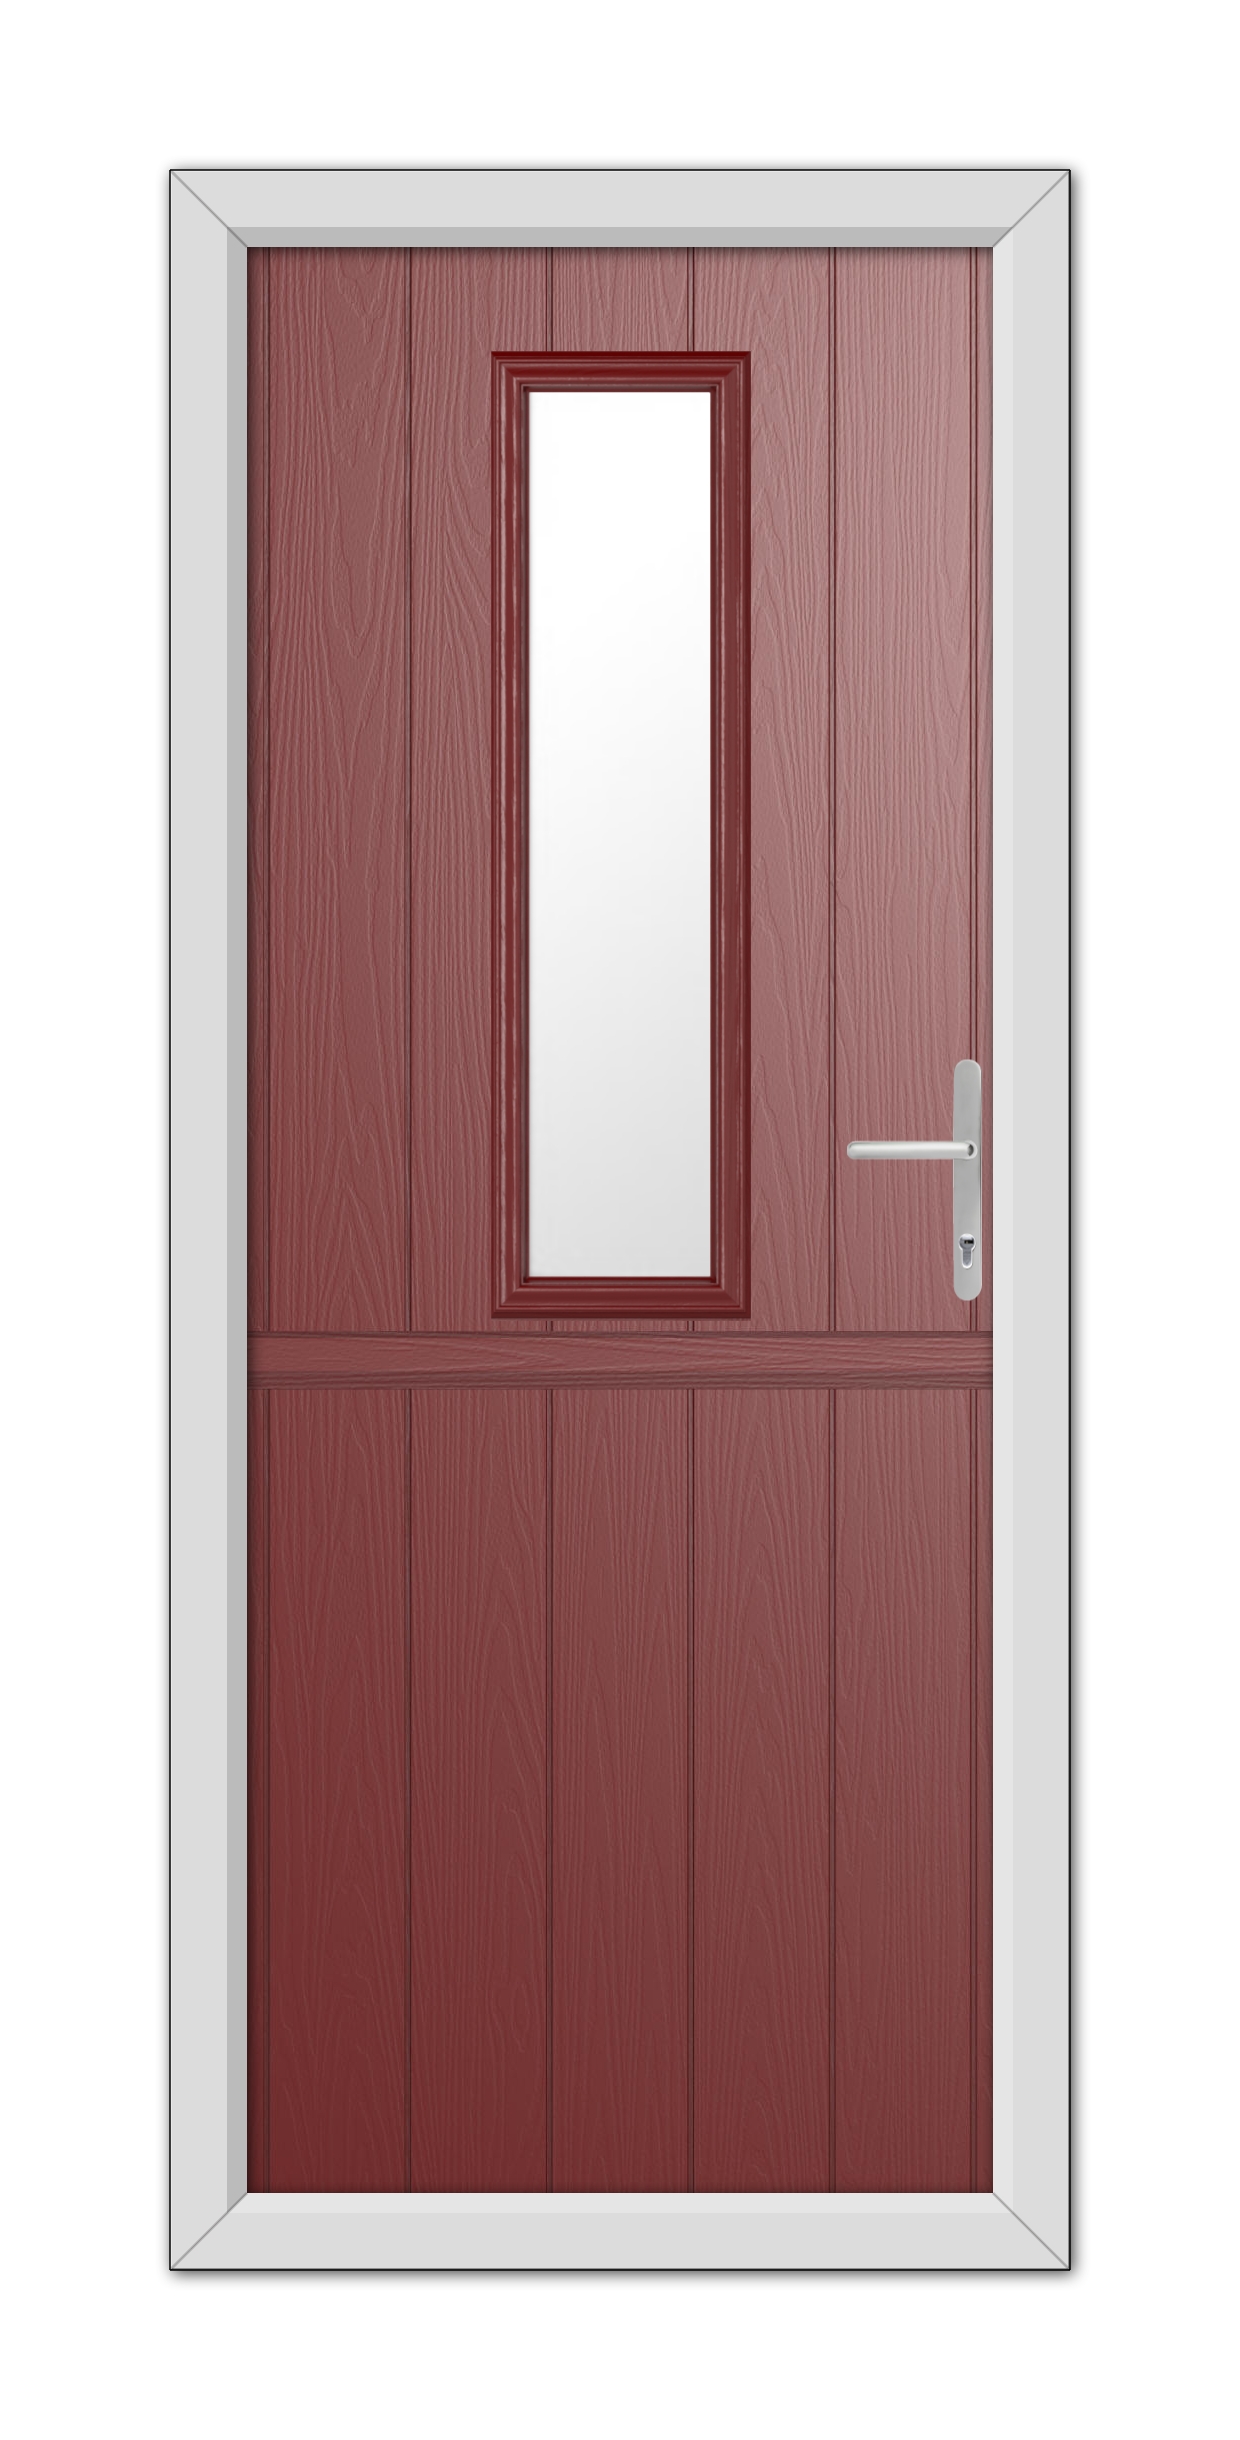 A Red Mowbray Stable Composite Door 48mm Timber Core with a vertical rectangle window at the center, framed in white, featuring a modern handle on the right side.